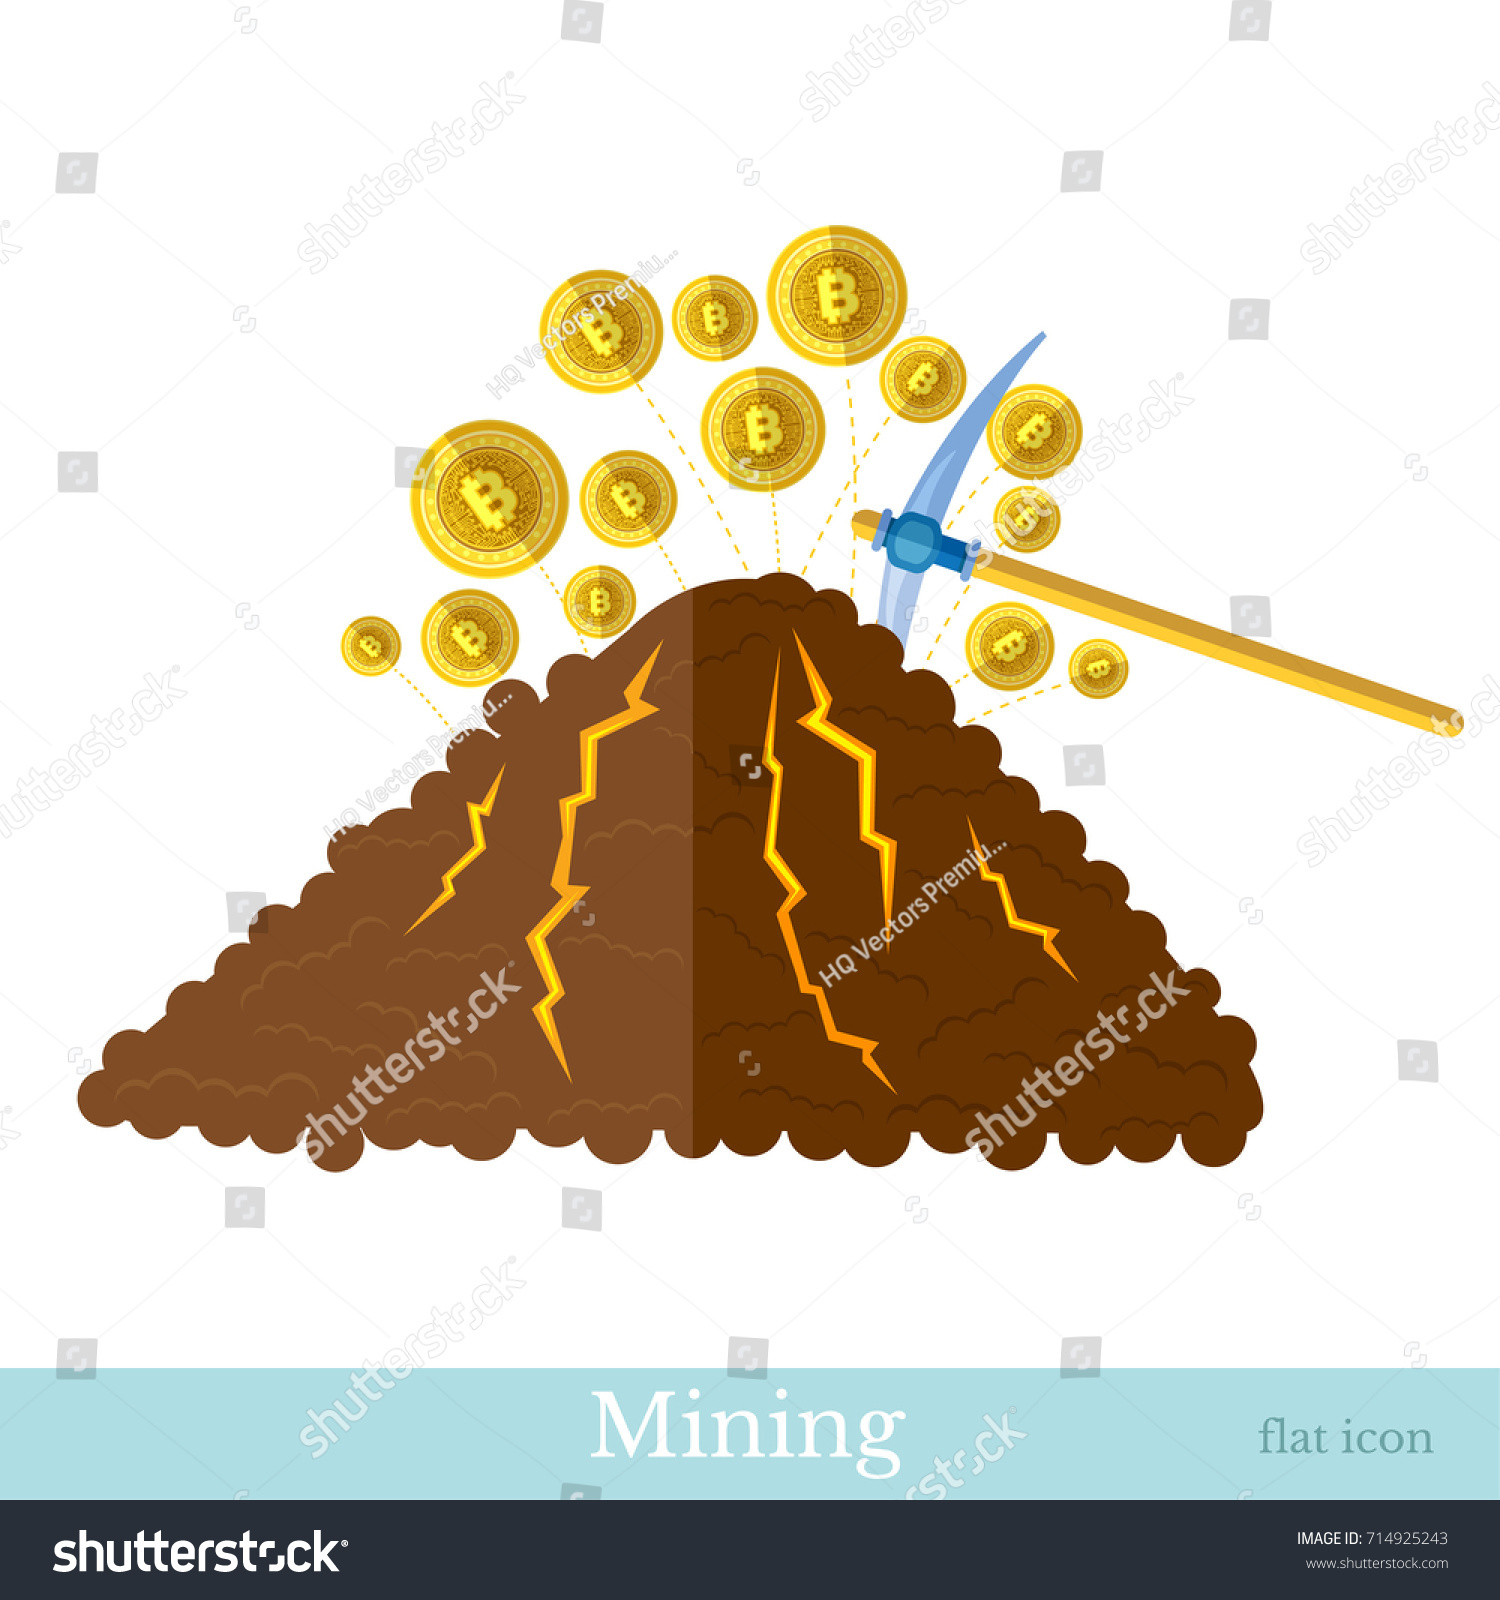 SVG of Flat icon with picks bit rock bit coins fly out. Mining bit coin business illustration isolated on white svg